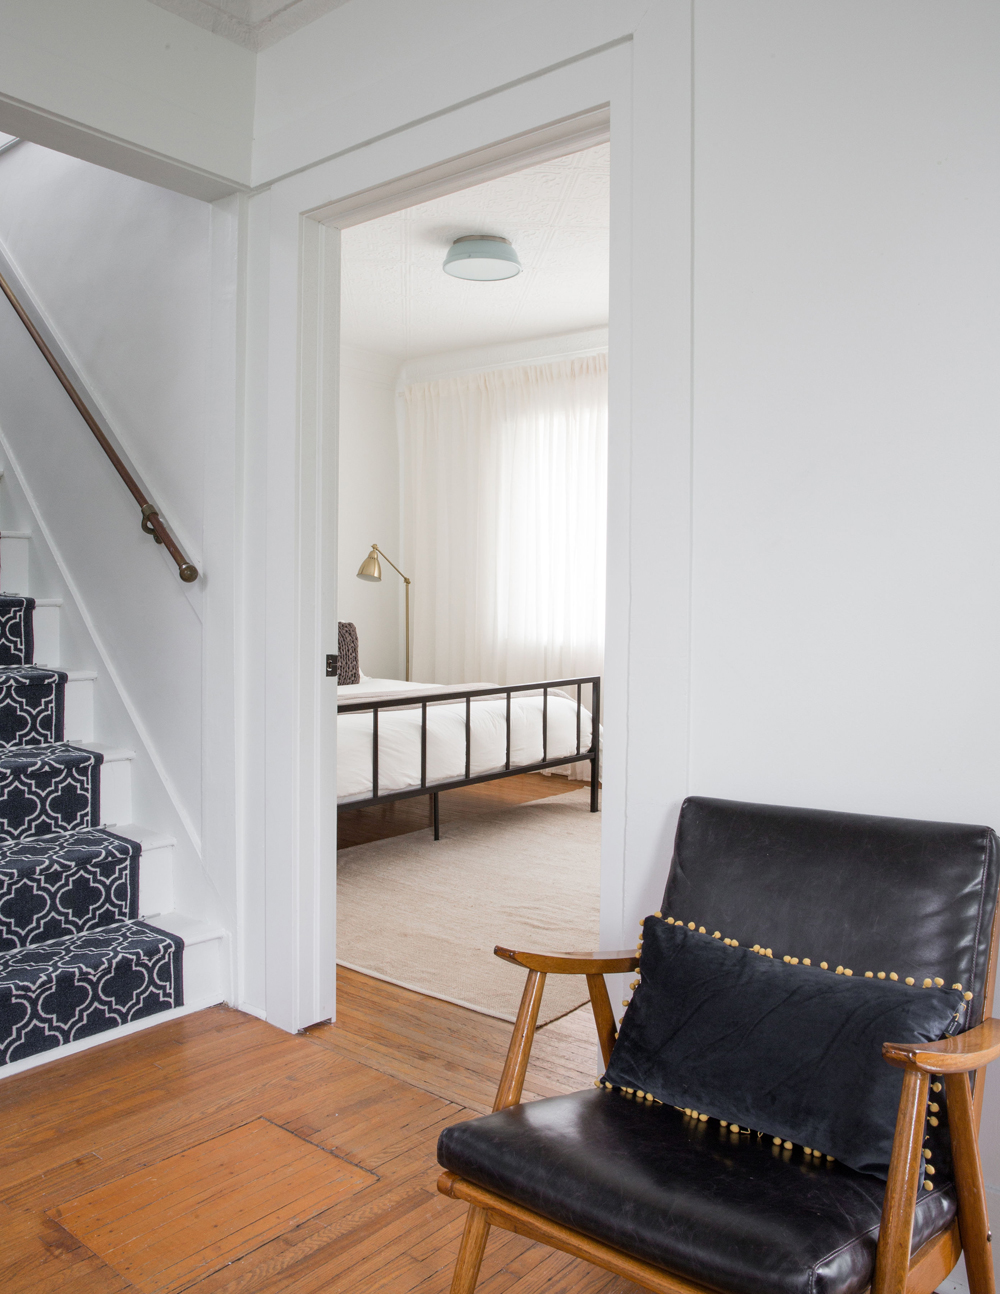 landing with black leather chair, black and white stair runner, looking into bedroom